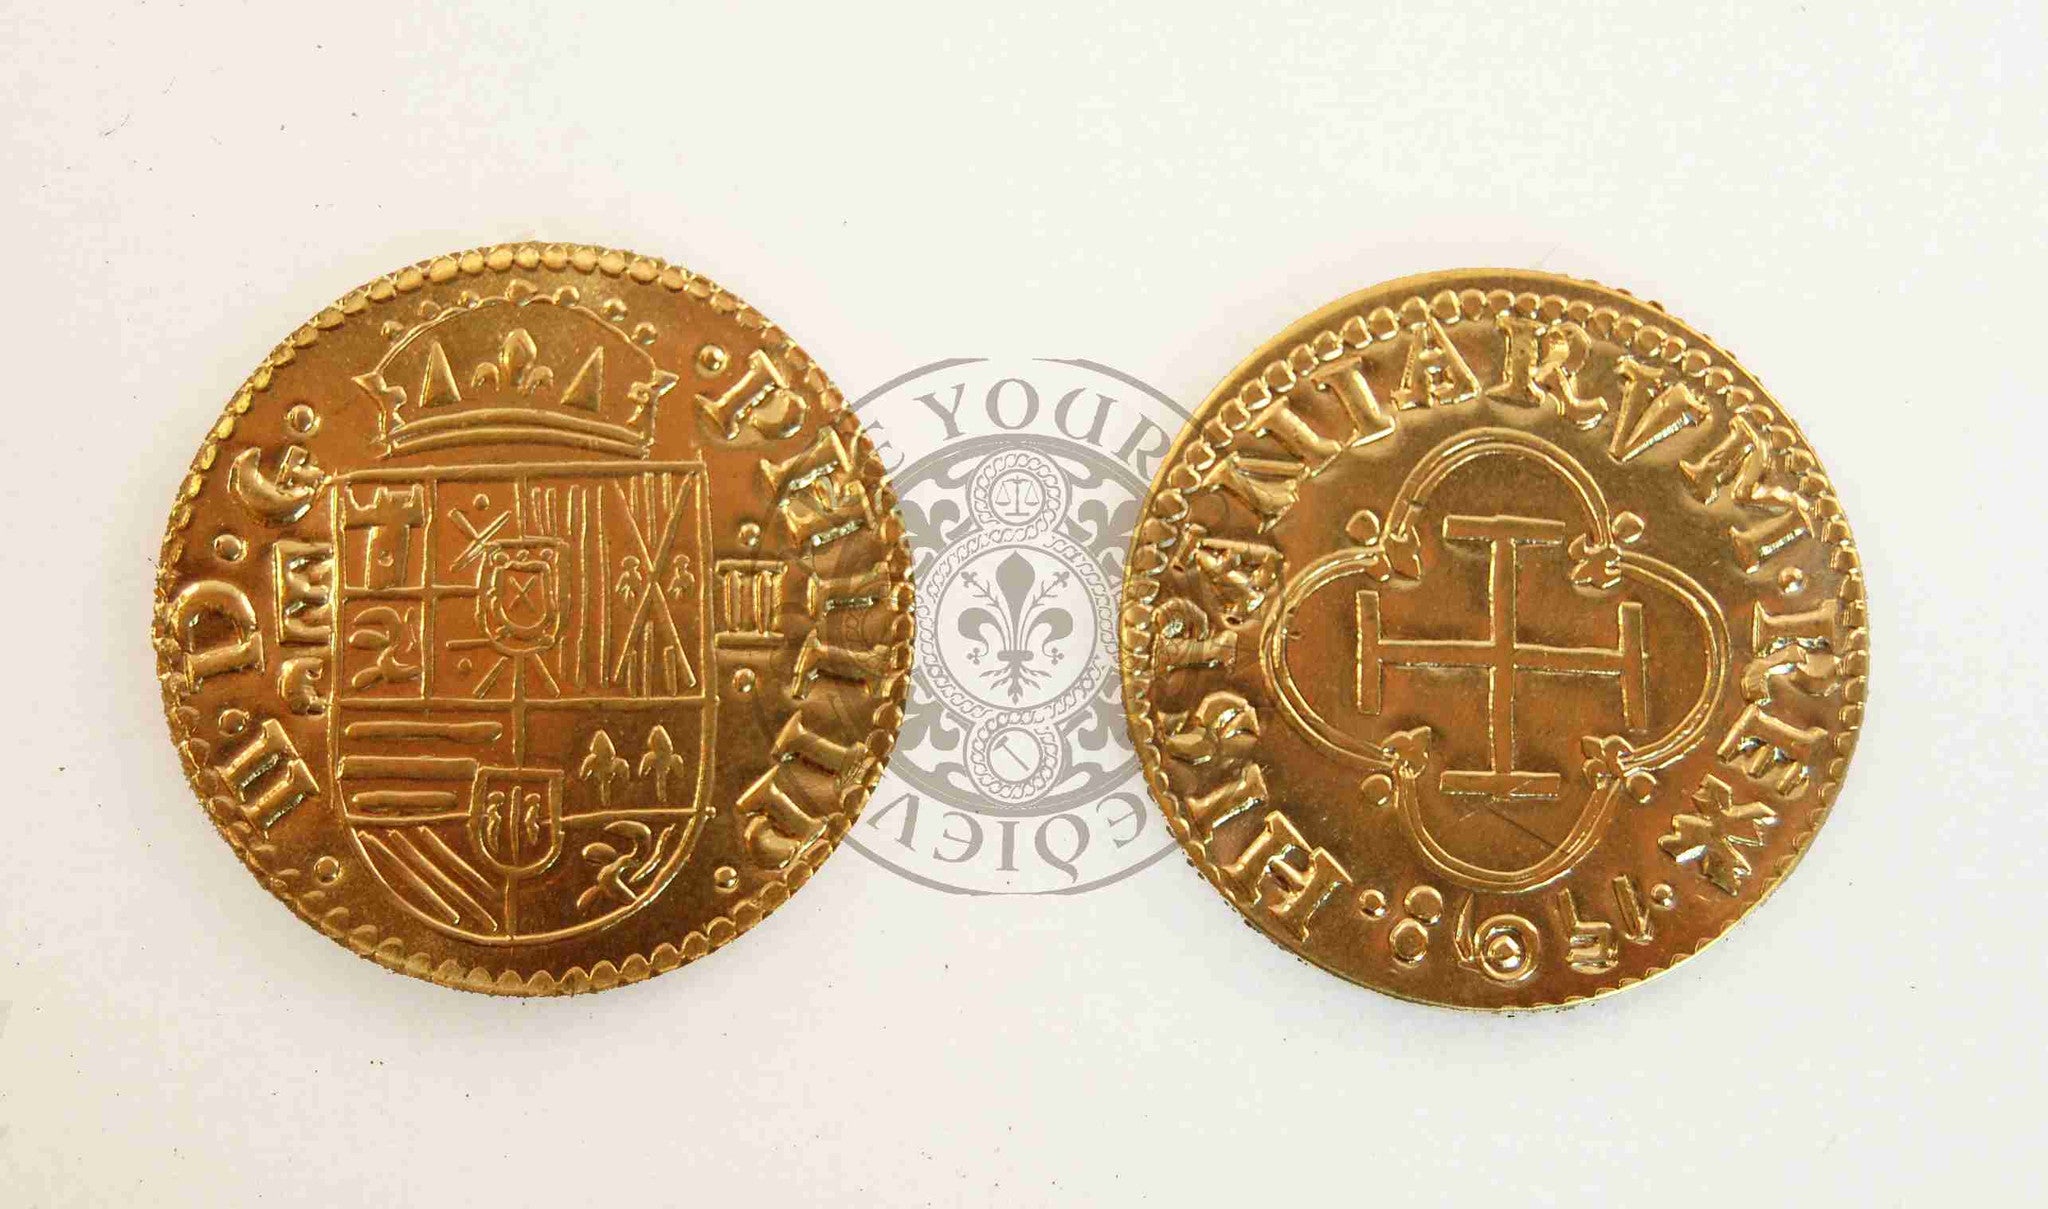 Spanish Gold Coins